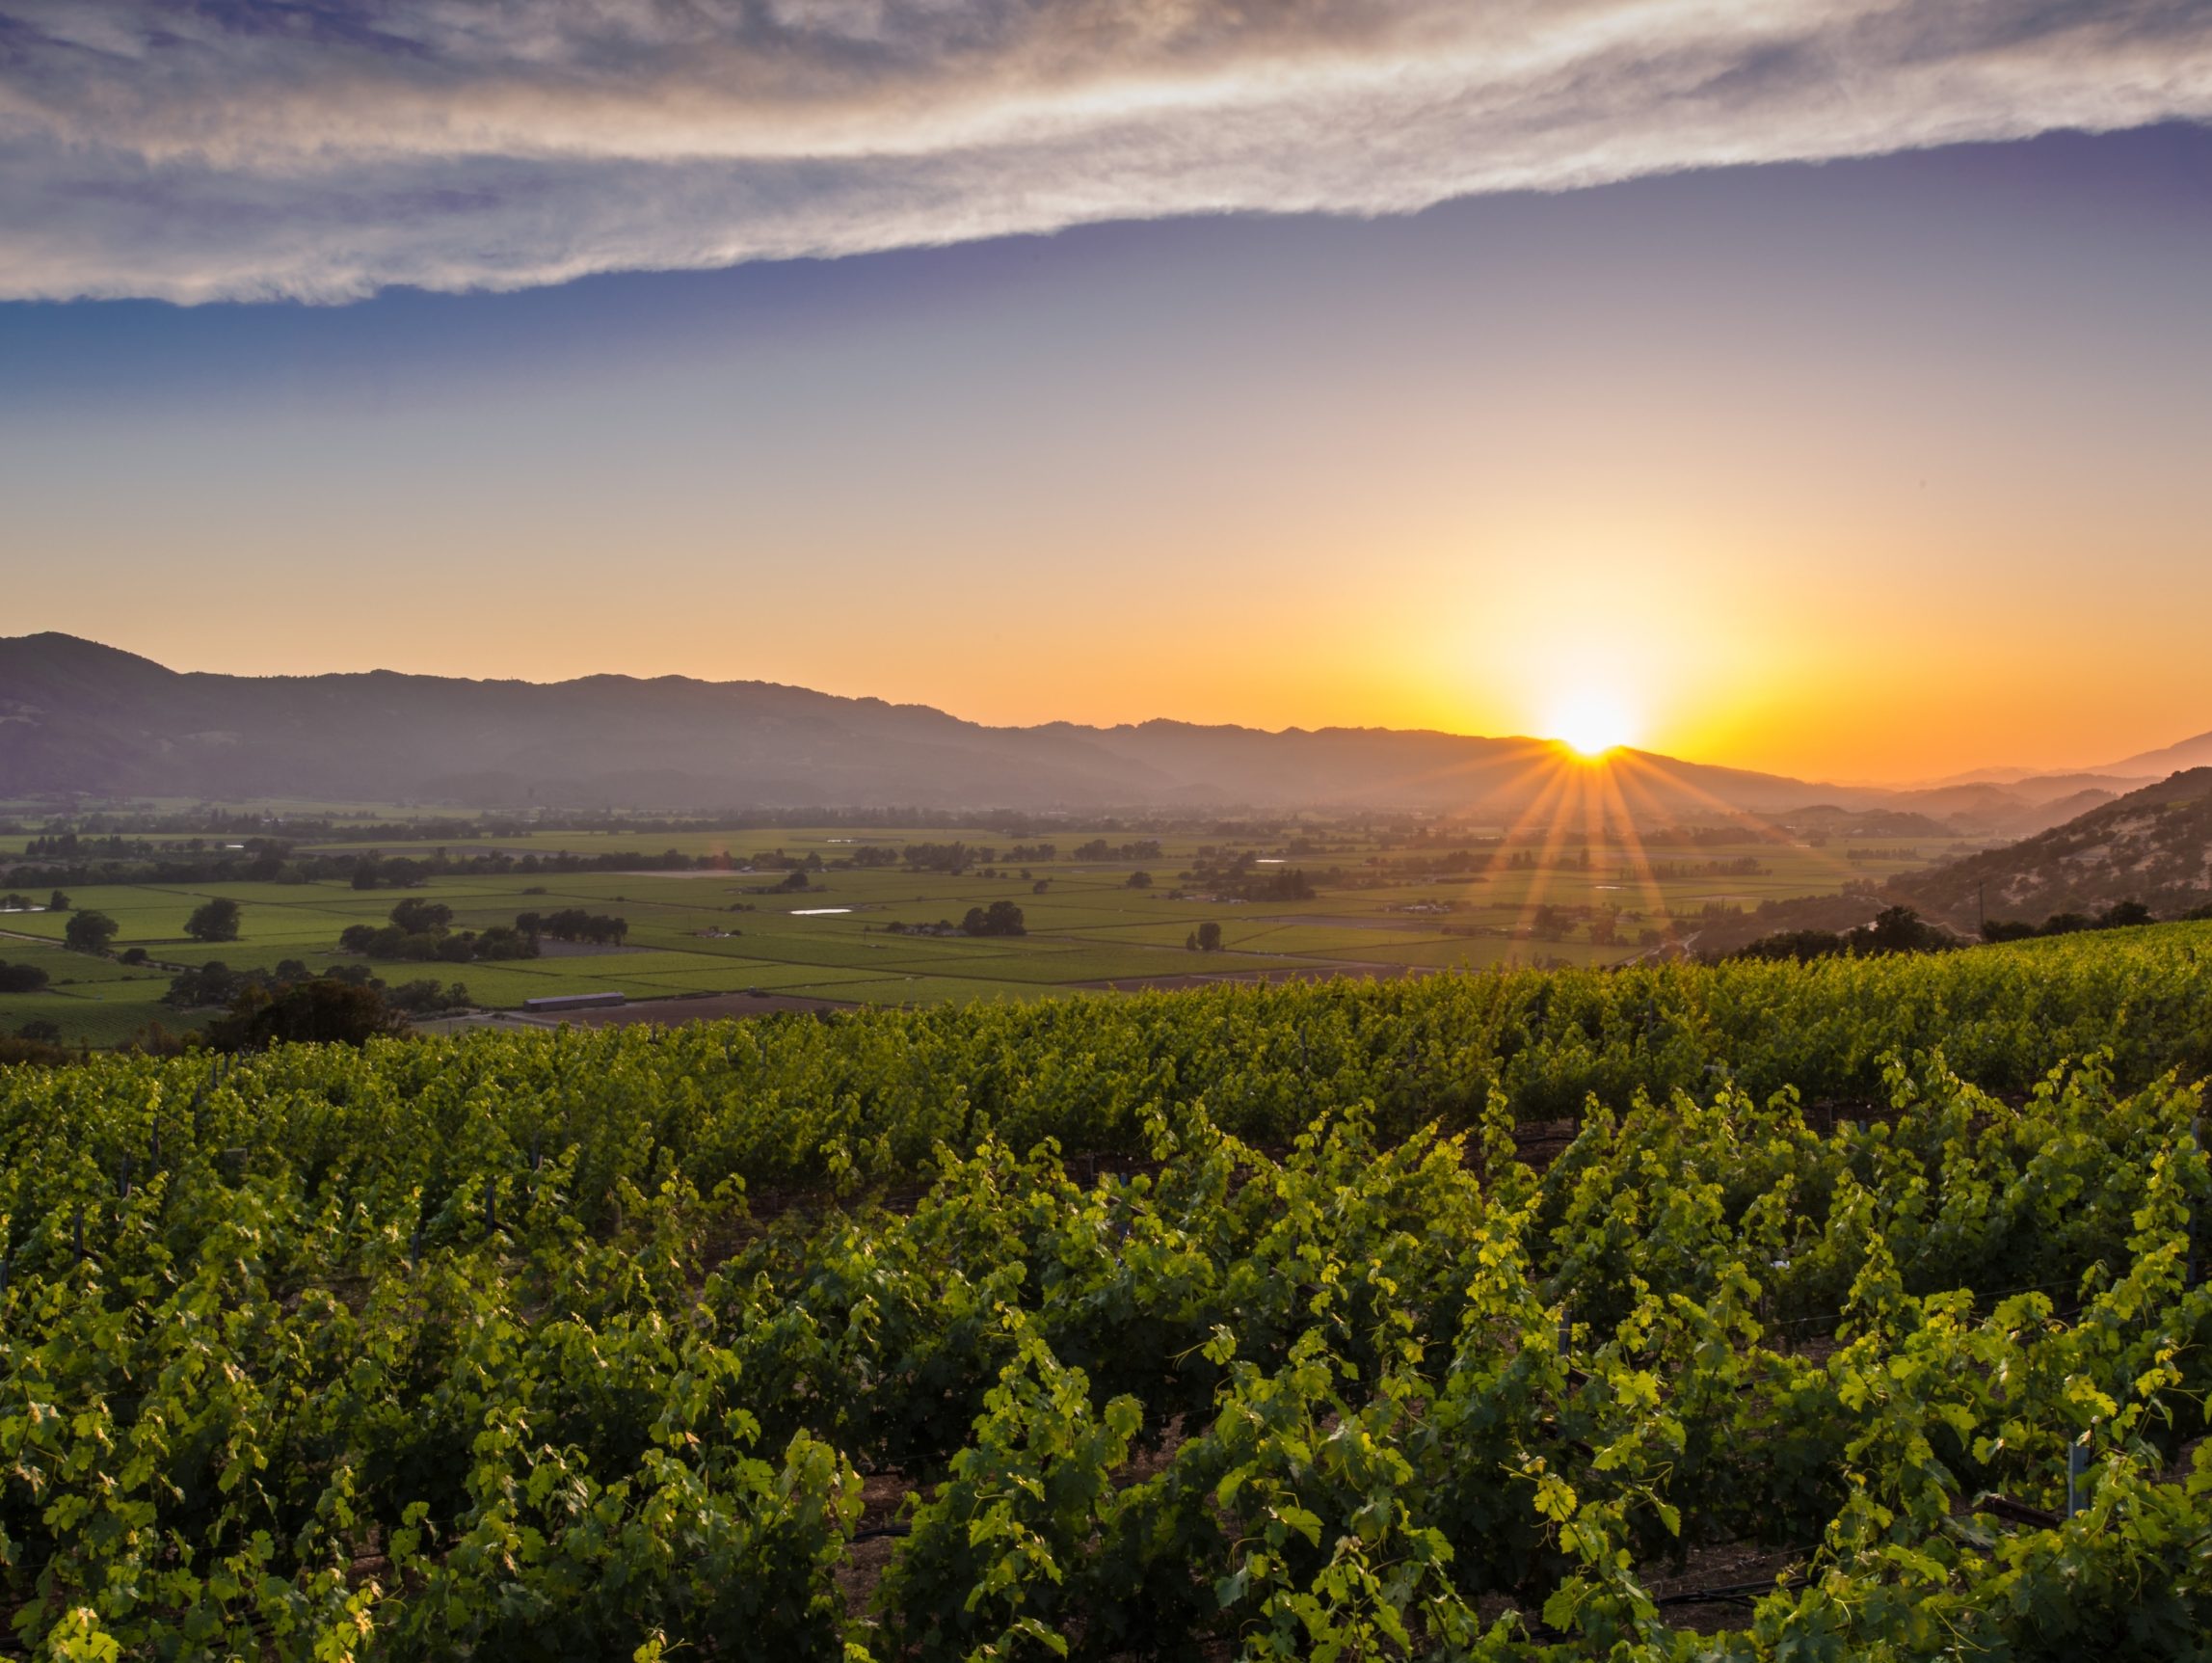 sunset in the distance with grape vines in the foreground